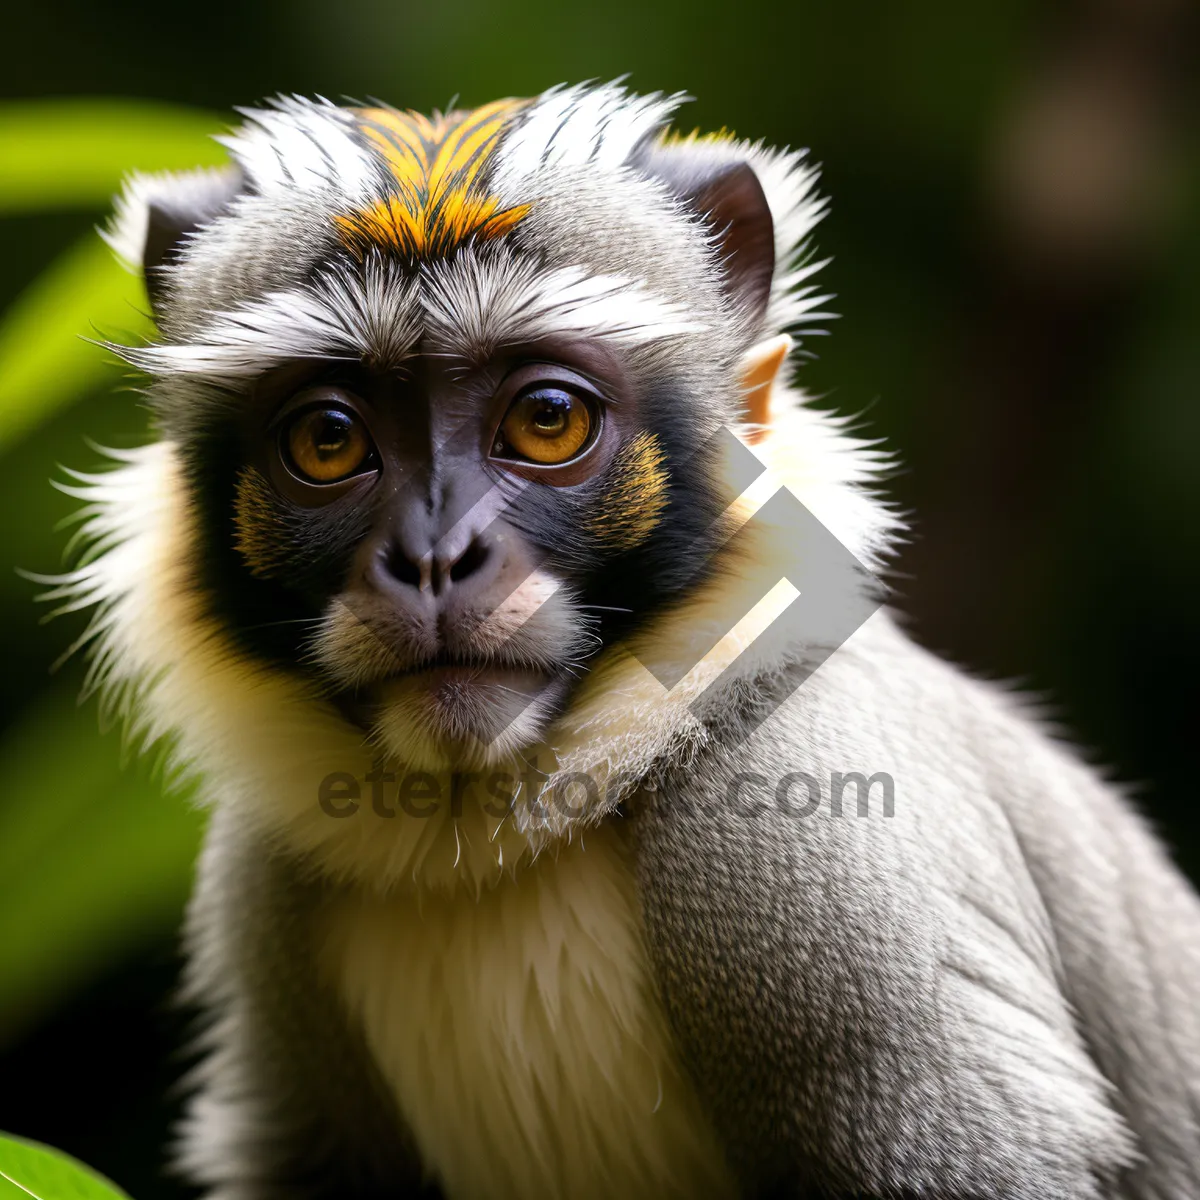 Picture of Cute Wild Monkey Portrait at the Zoo